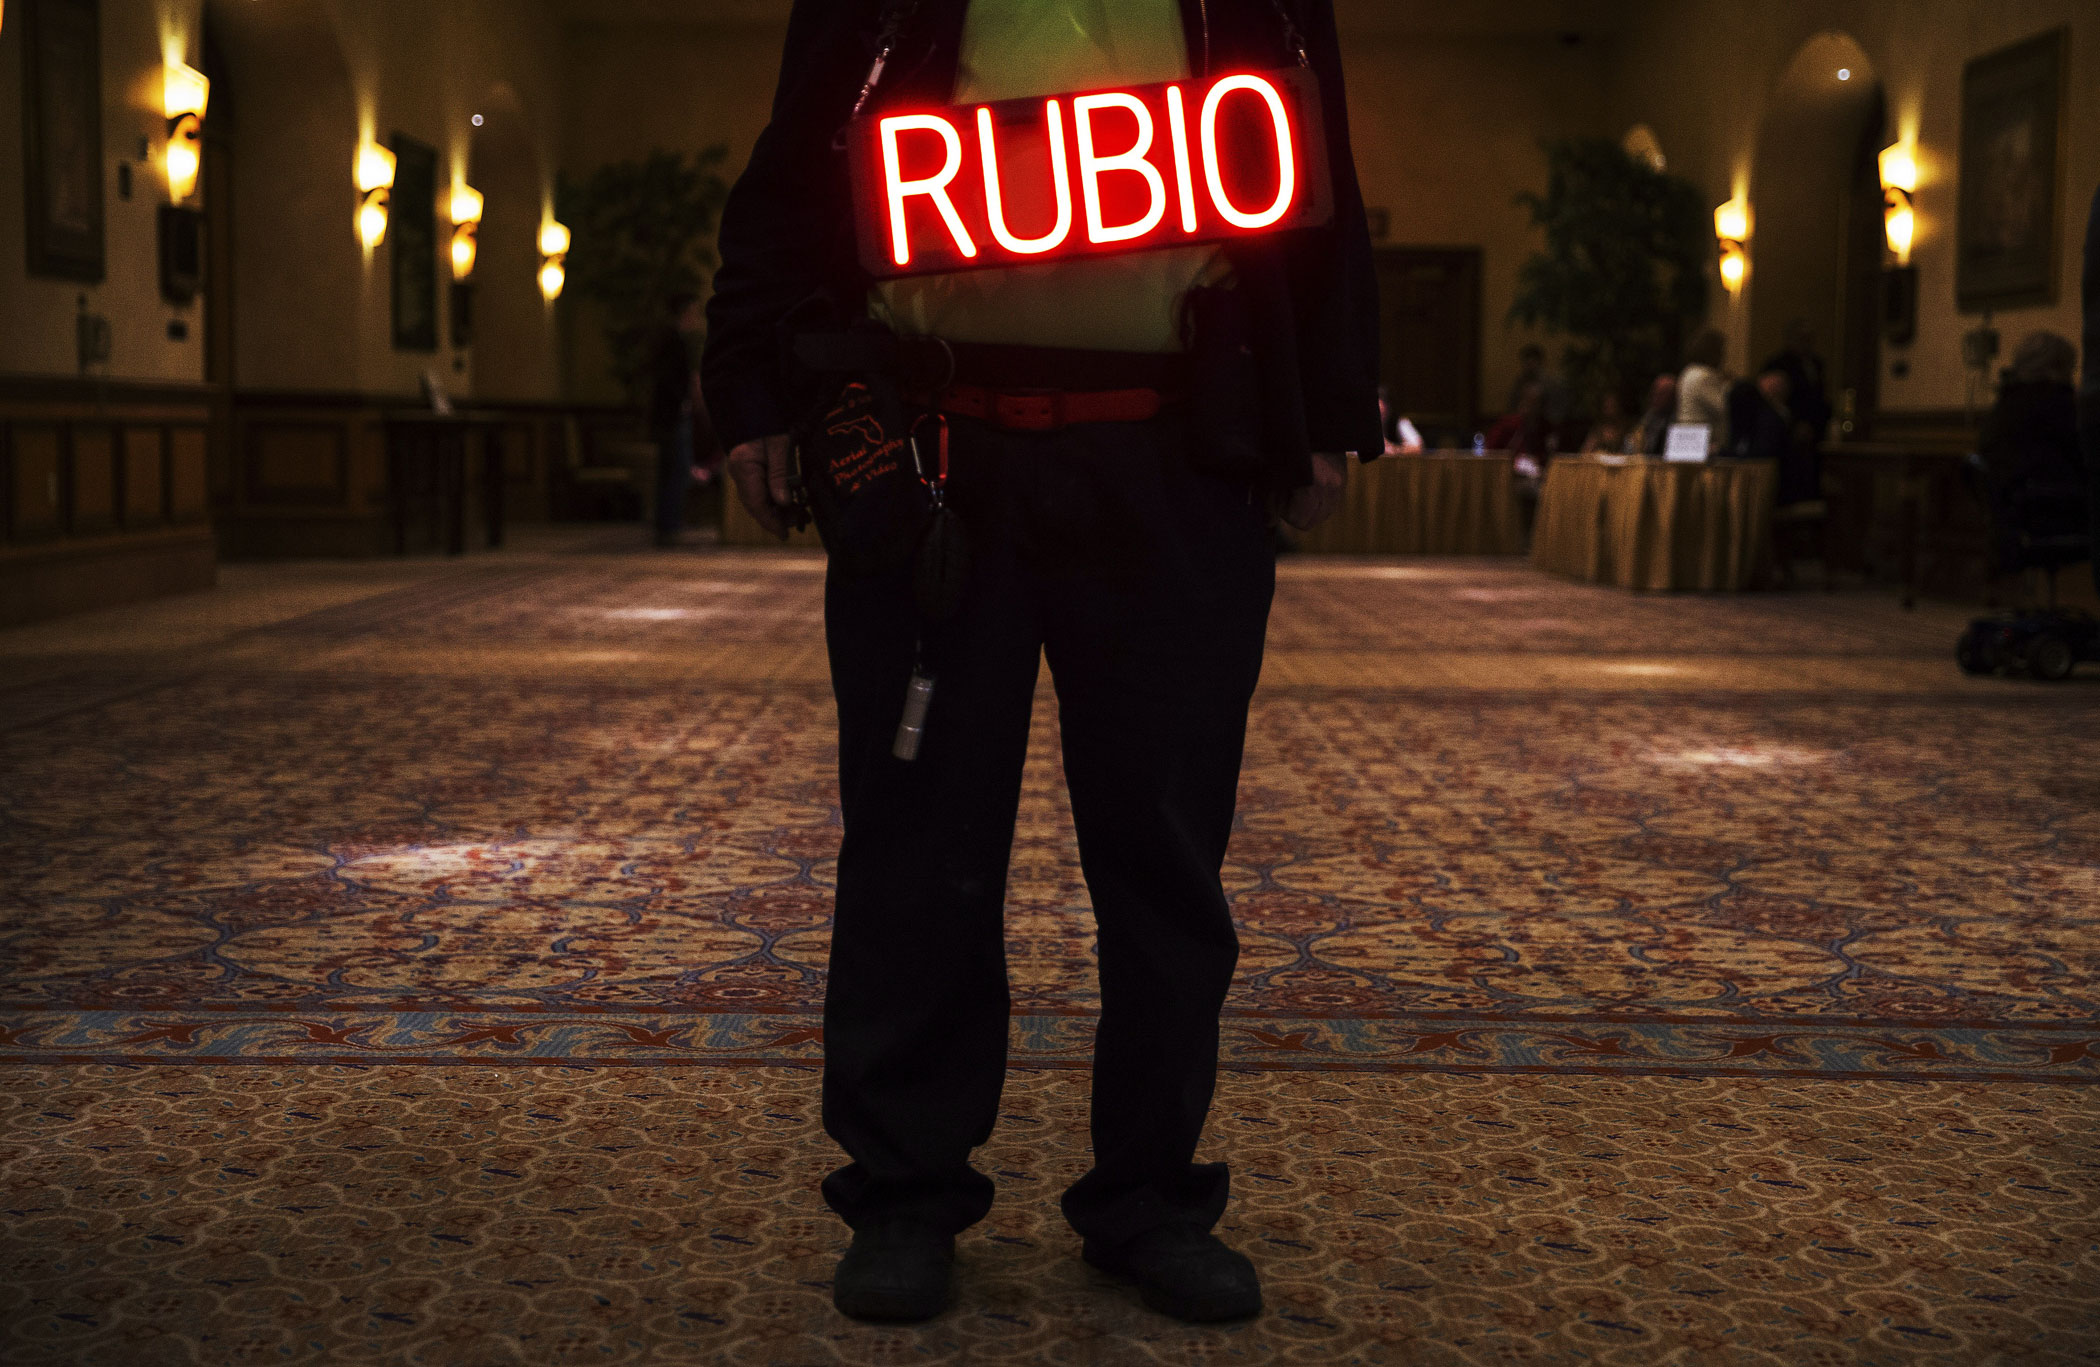 A supporter wears a sign at a rally for Republican presidential candidate Marco Rubio at Texas Station in North Las Vegas on Feb. 21, 2016.